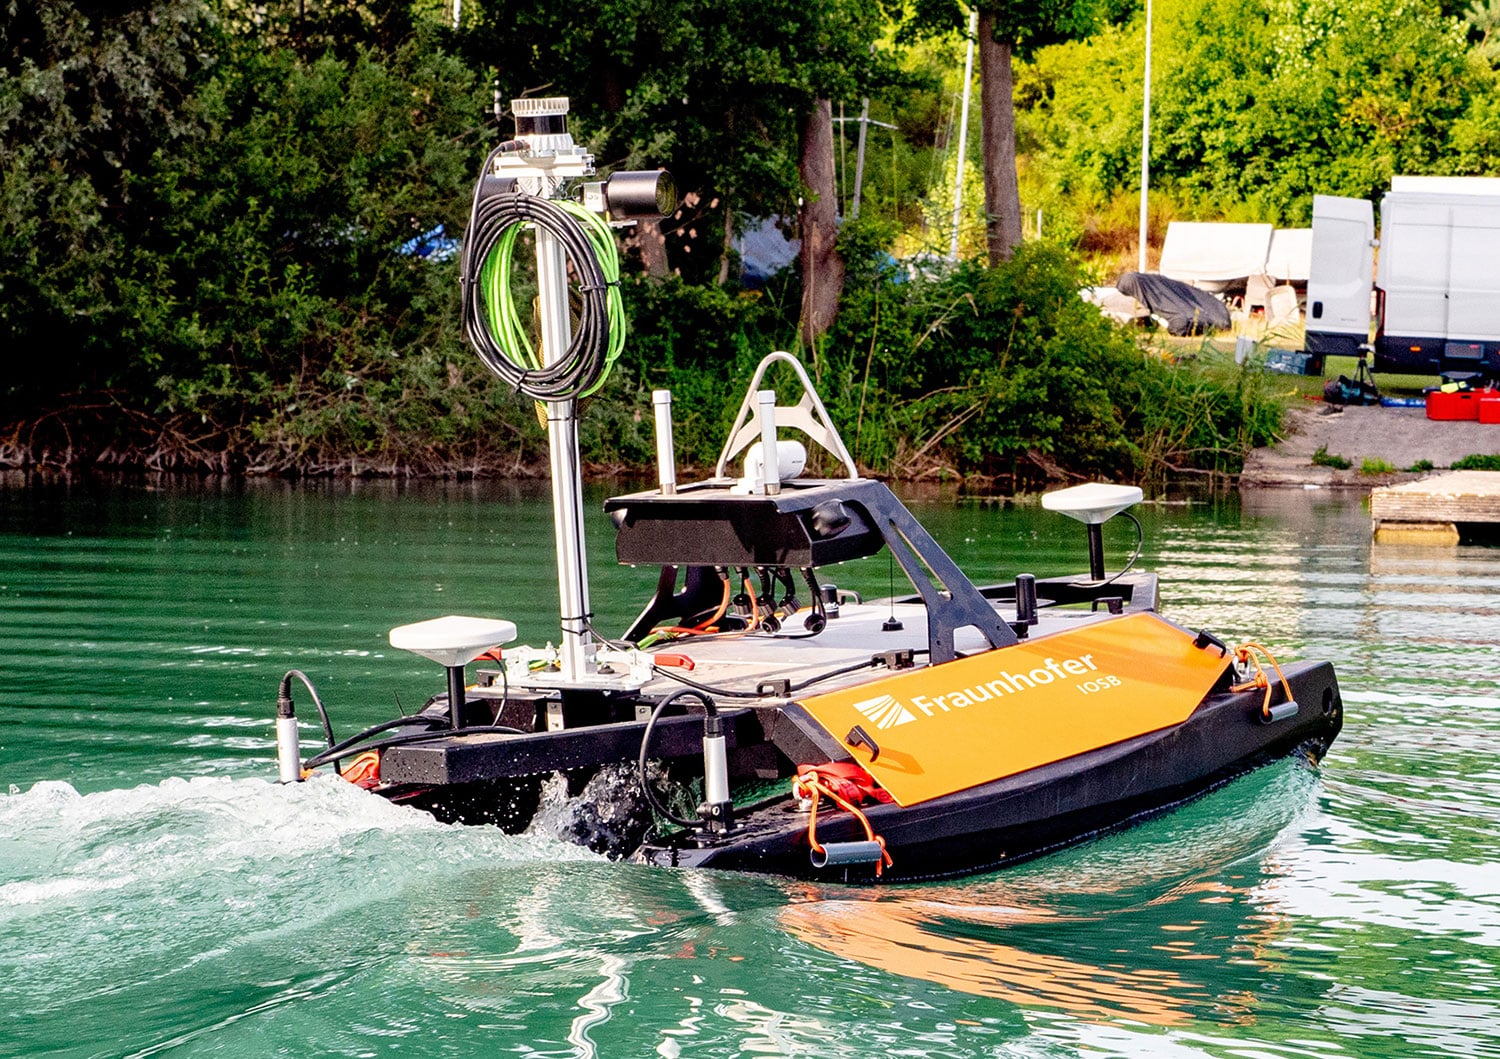 The USV in action, using the autonomous capabilities and sensors for underwater and above-water mapping fitted.